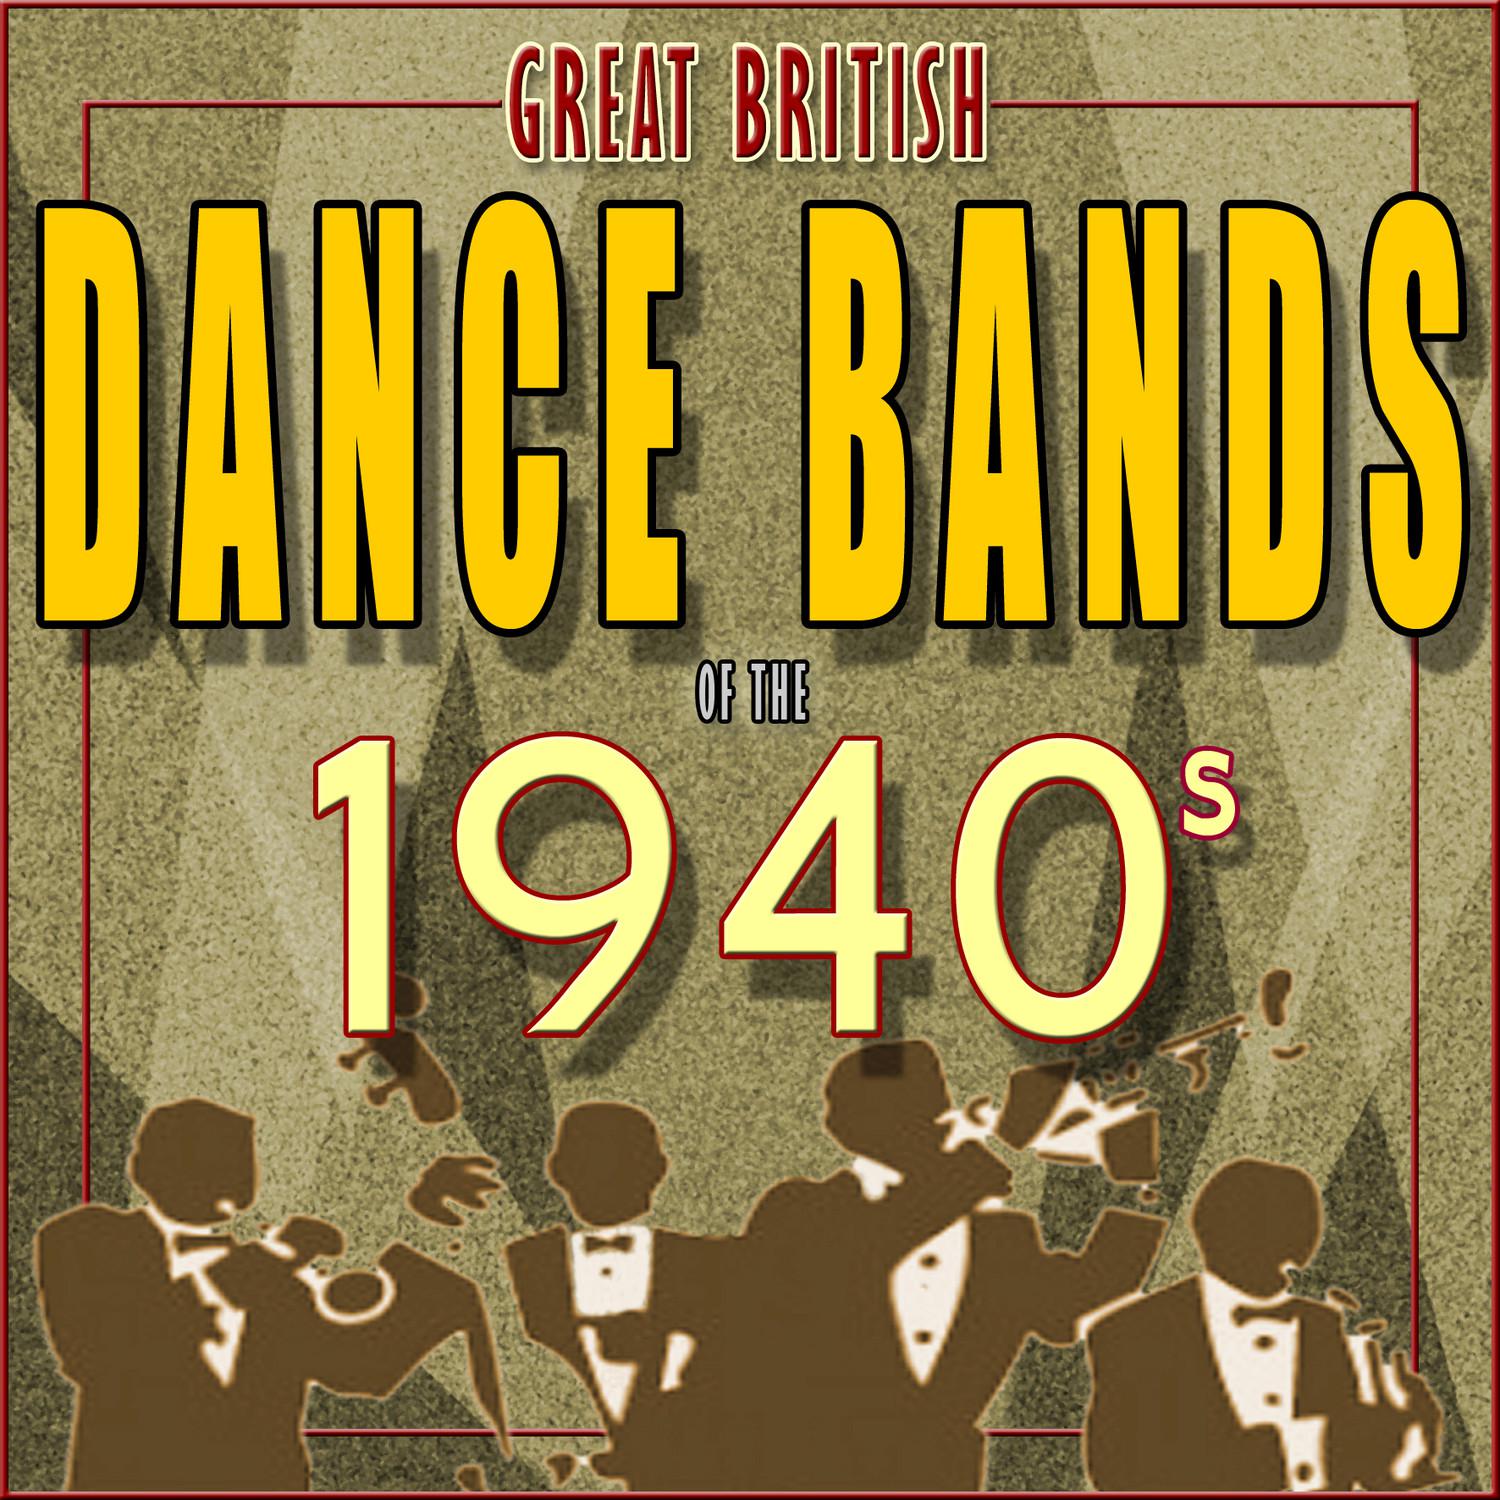 Great British Dance Bands of the 1940s